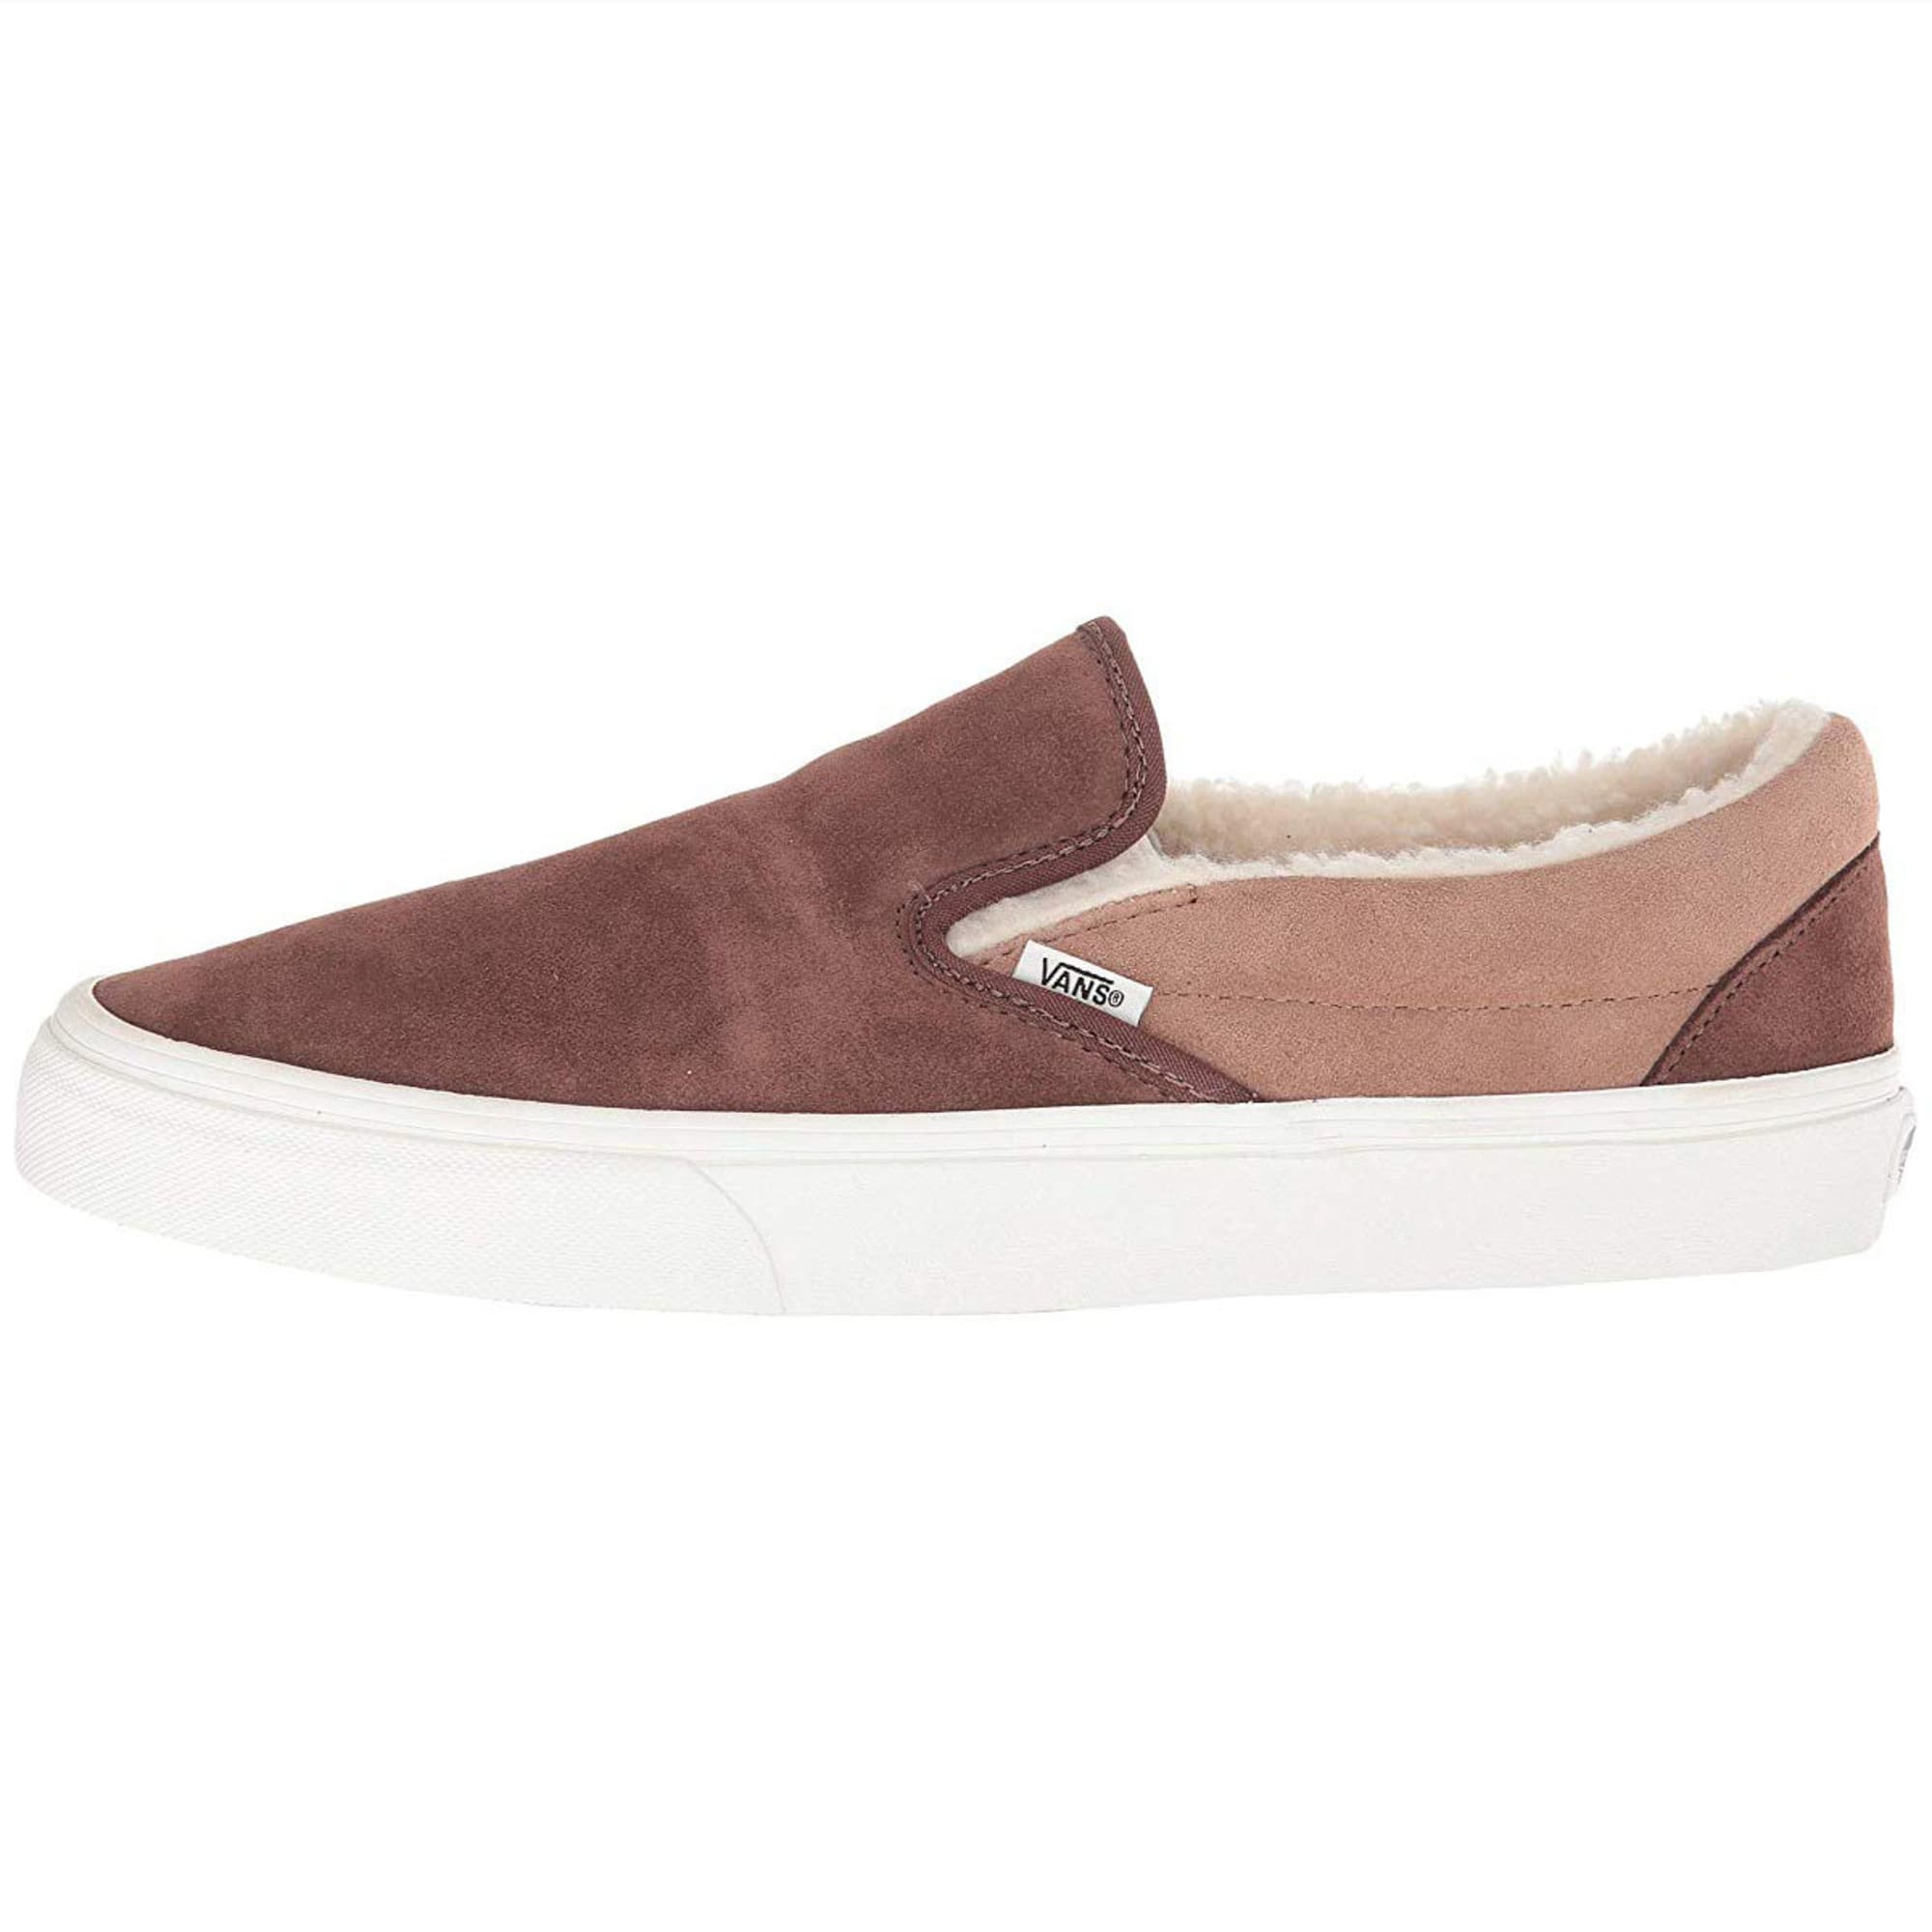 sherpa slip on shoes